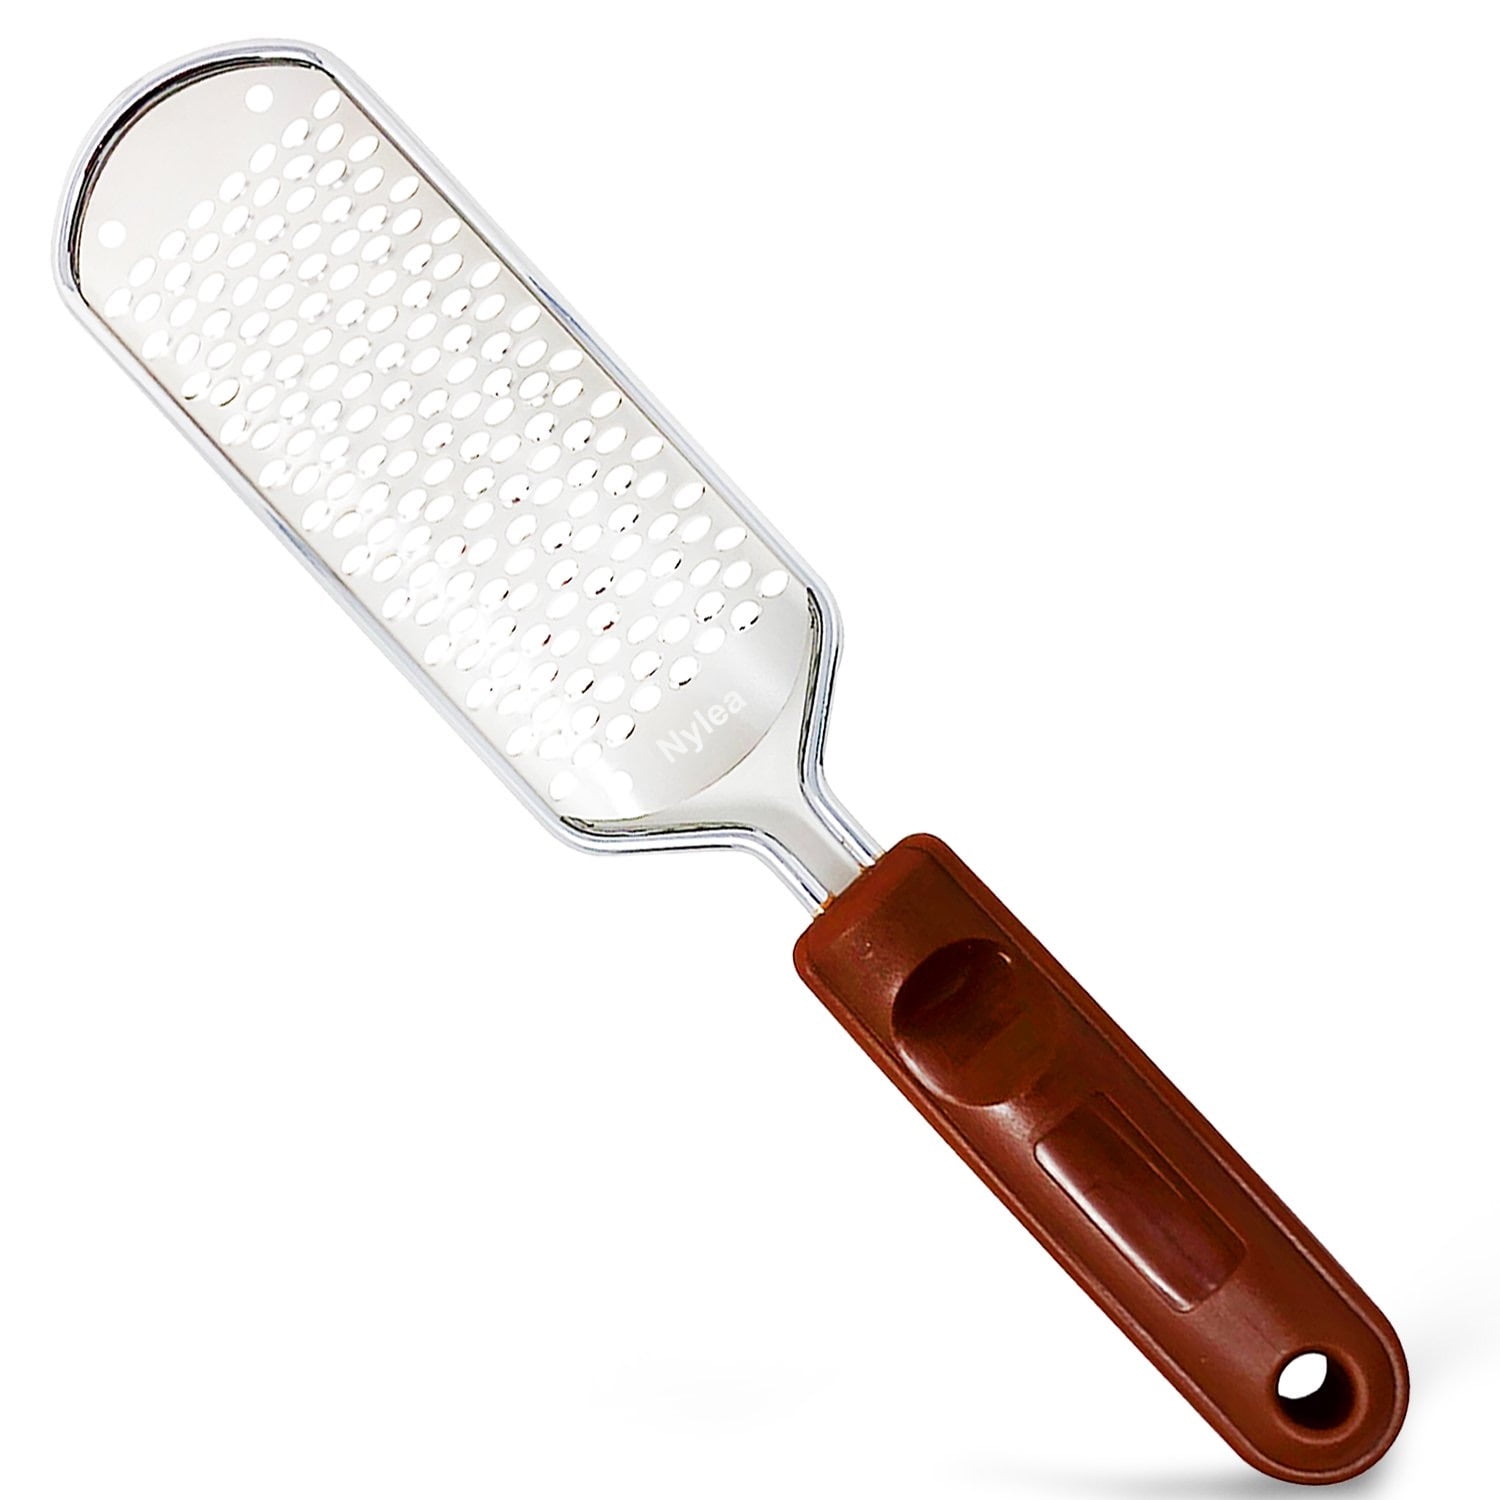 Professional Foot File Lightweight & Strong Stainless Steel - Only